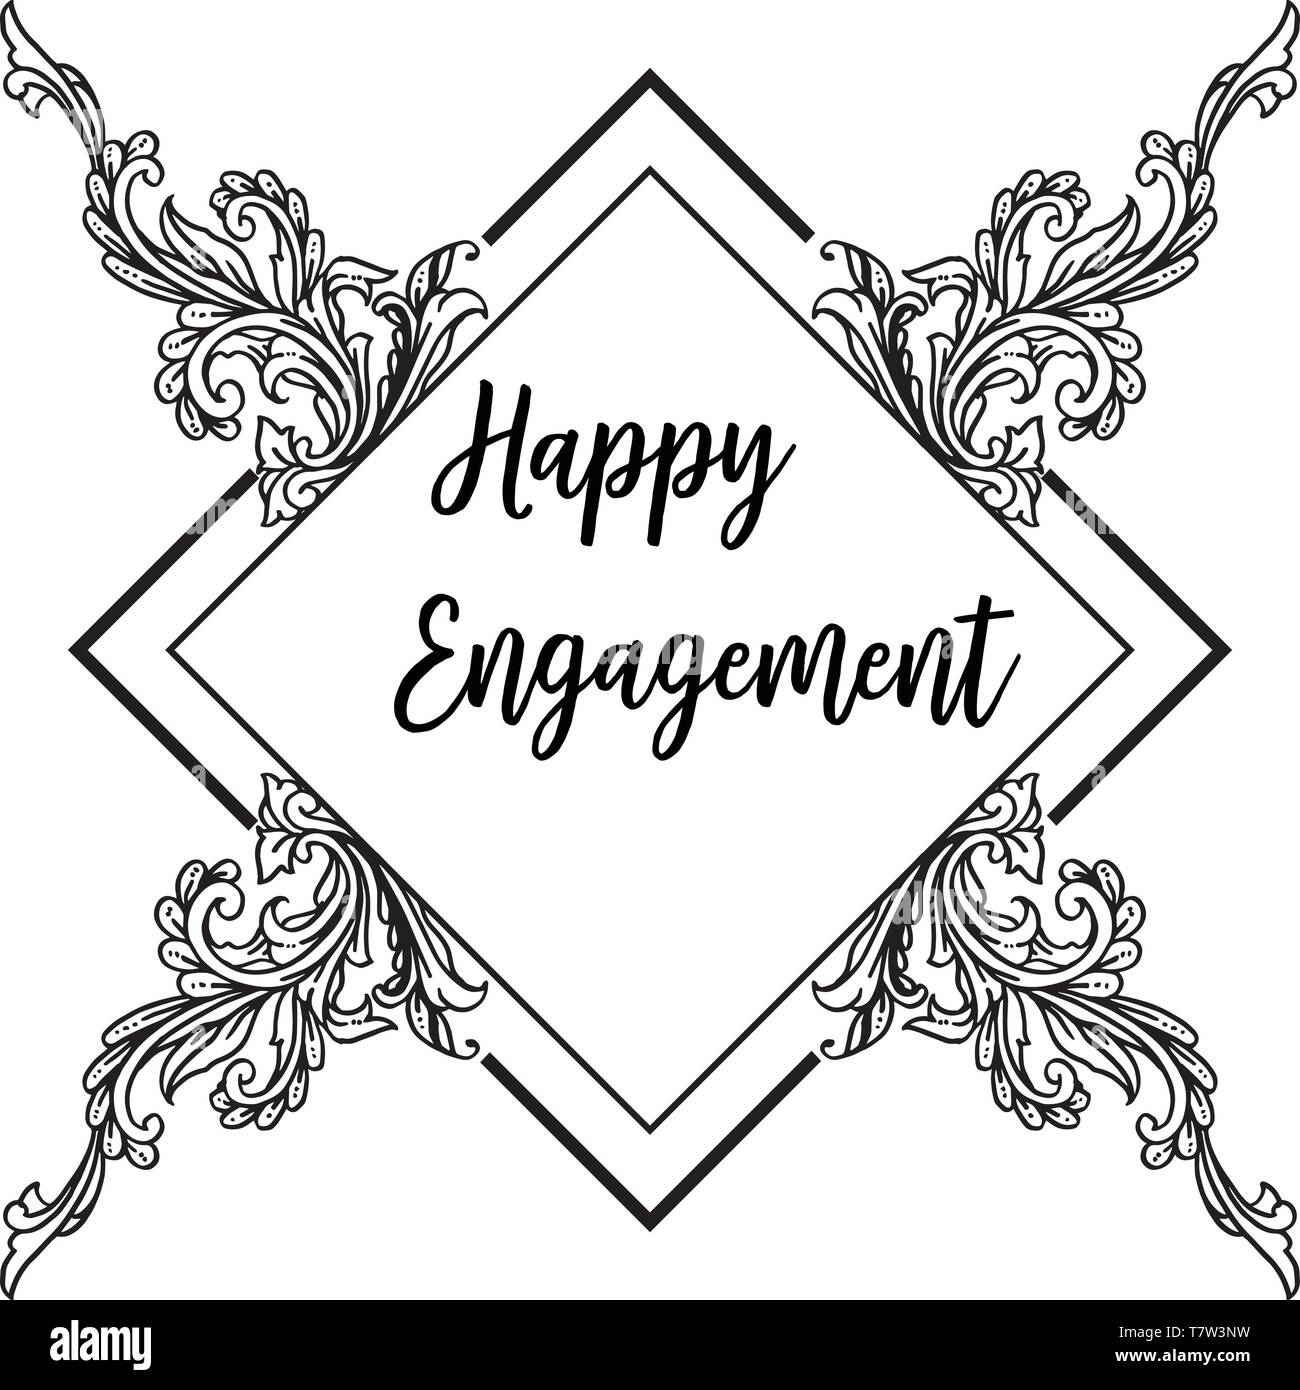 Vector illustration various pattern happy engagement with ...